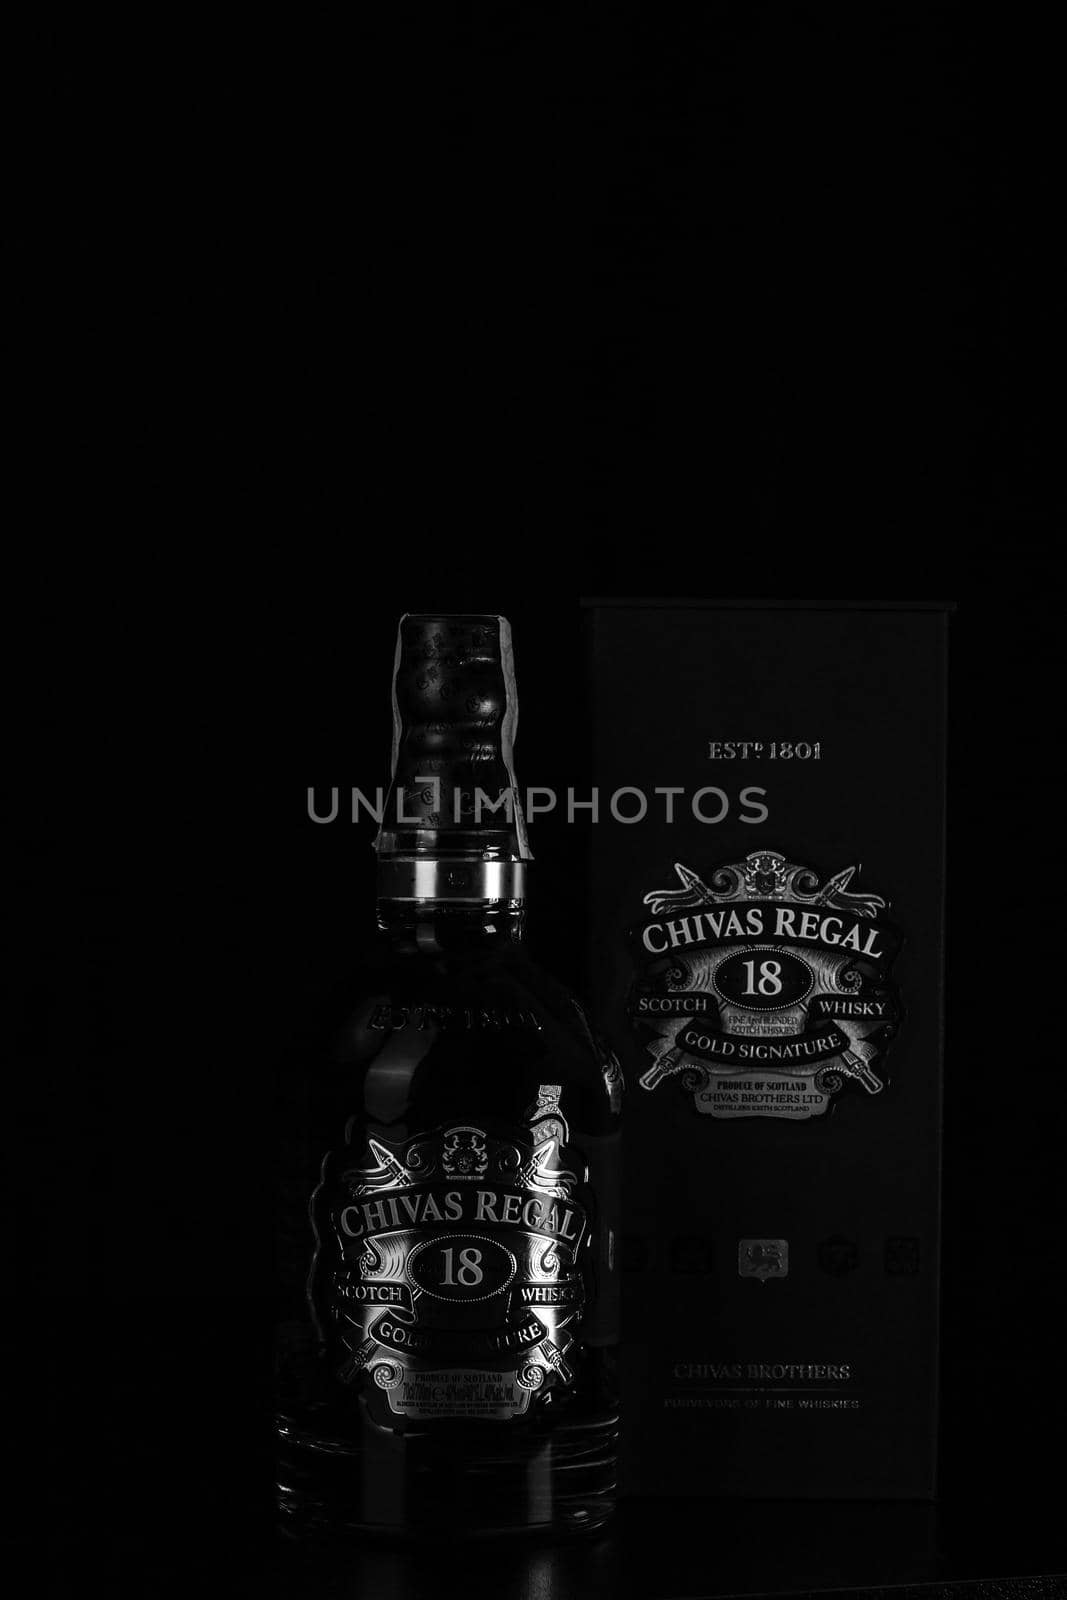 Chivas Regal 18 is blended from whiskies matured for at least 18 years. Whisky bottle on barrel. Illustrative editorial photo Bucharest, Romania, 2021